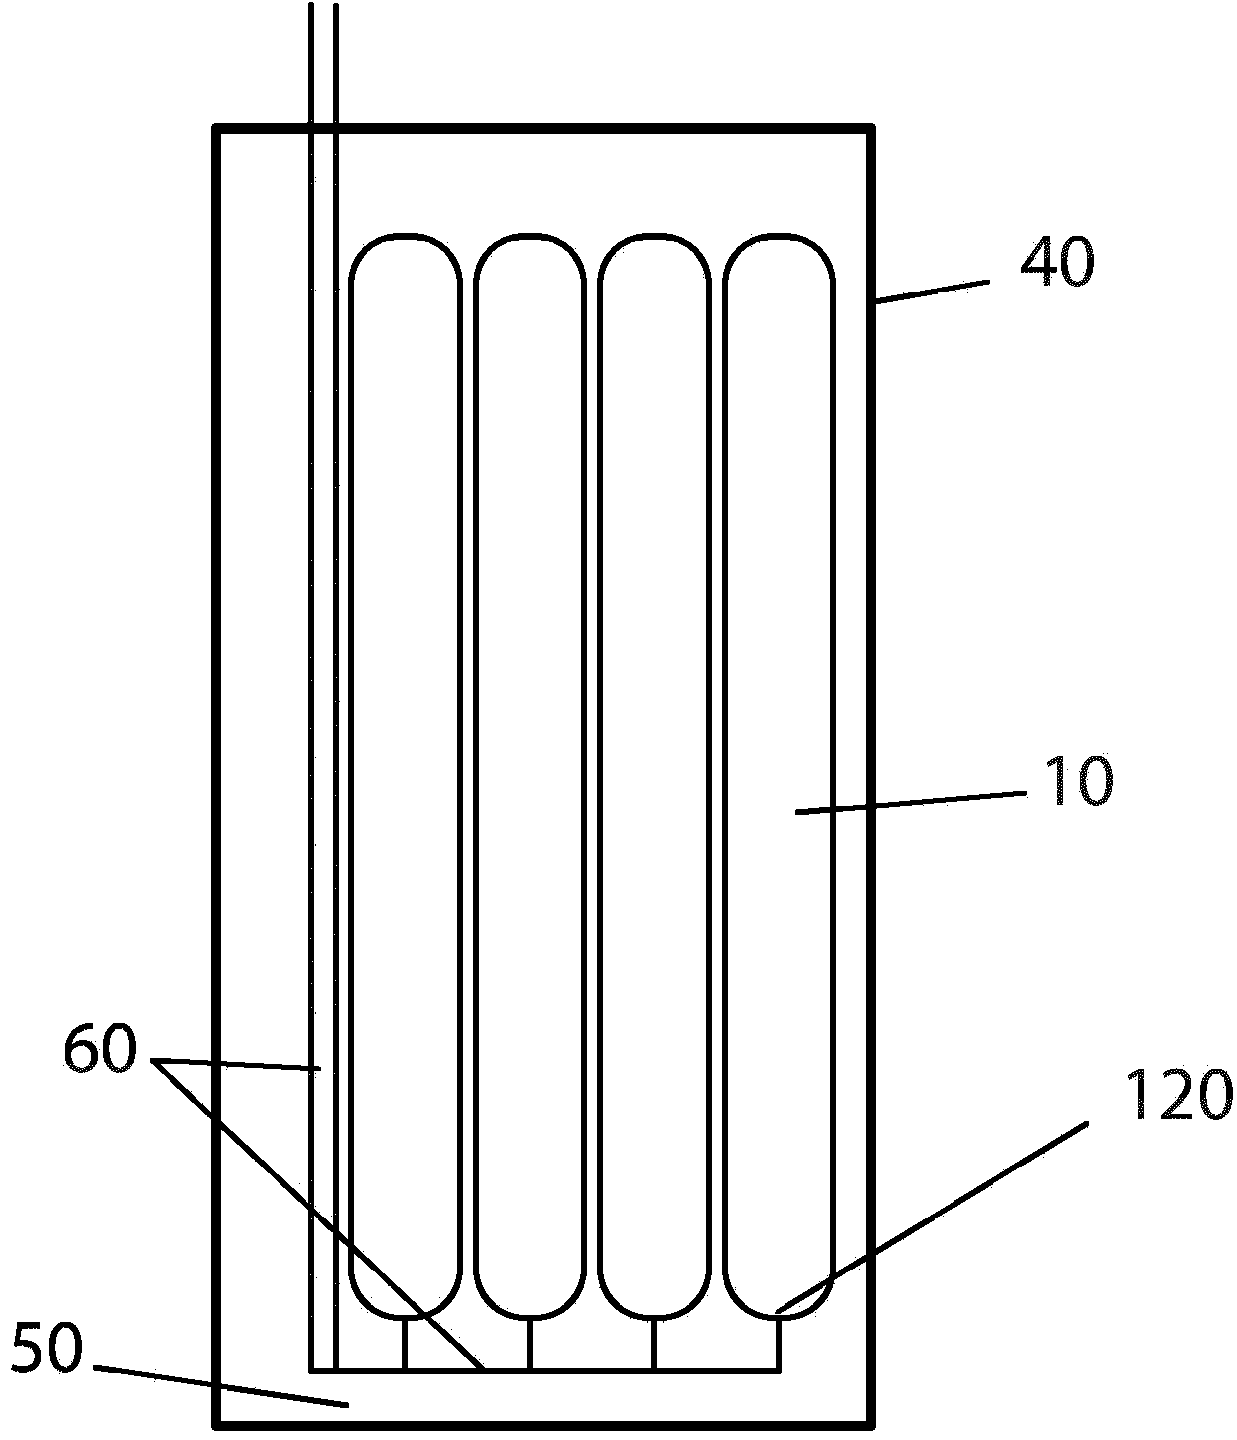 Pressure vessel with metallic liner and two fiber layers of different material